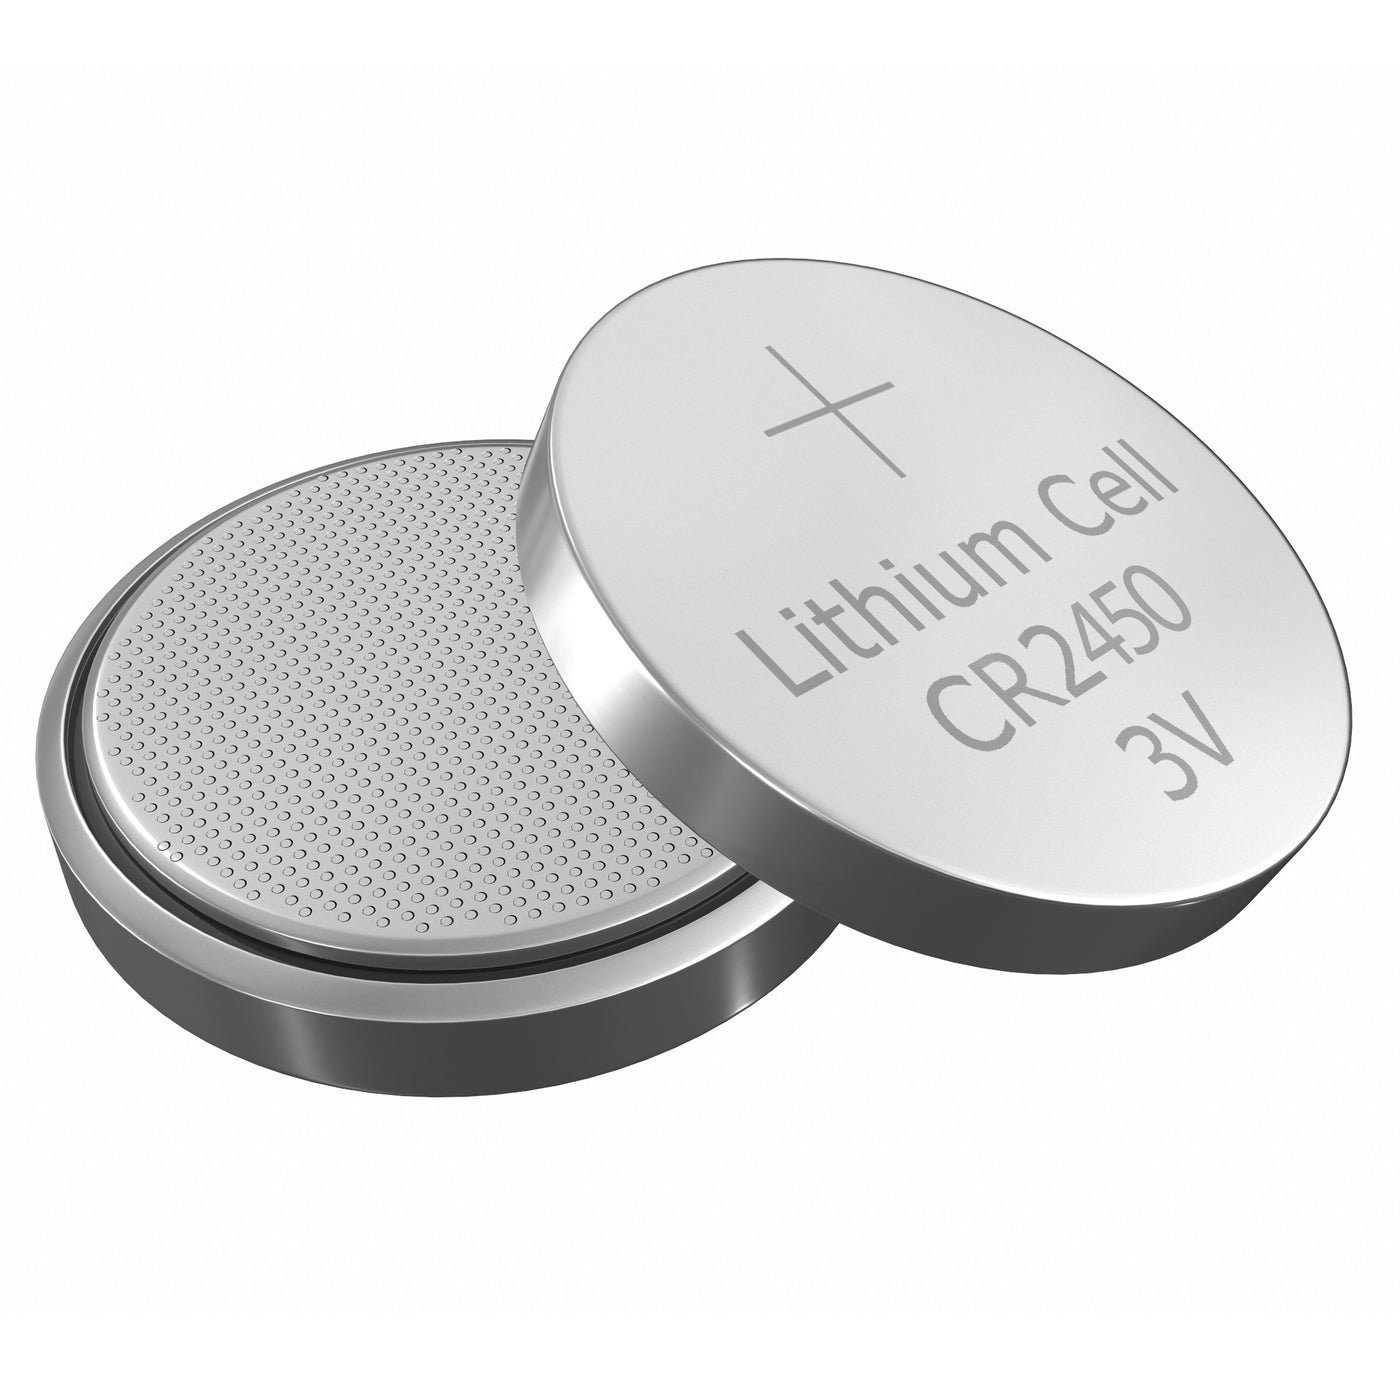 P001966 - Lithium button cell battery CR2450 3V